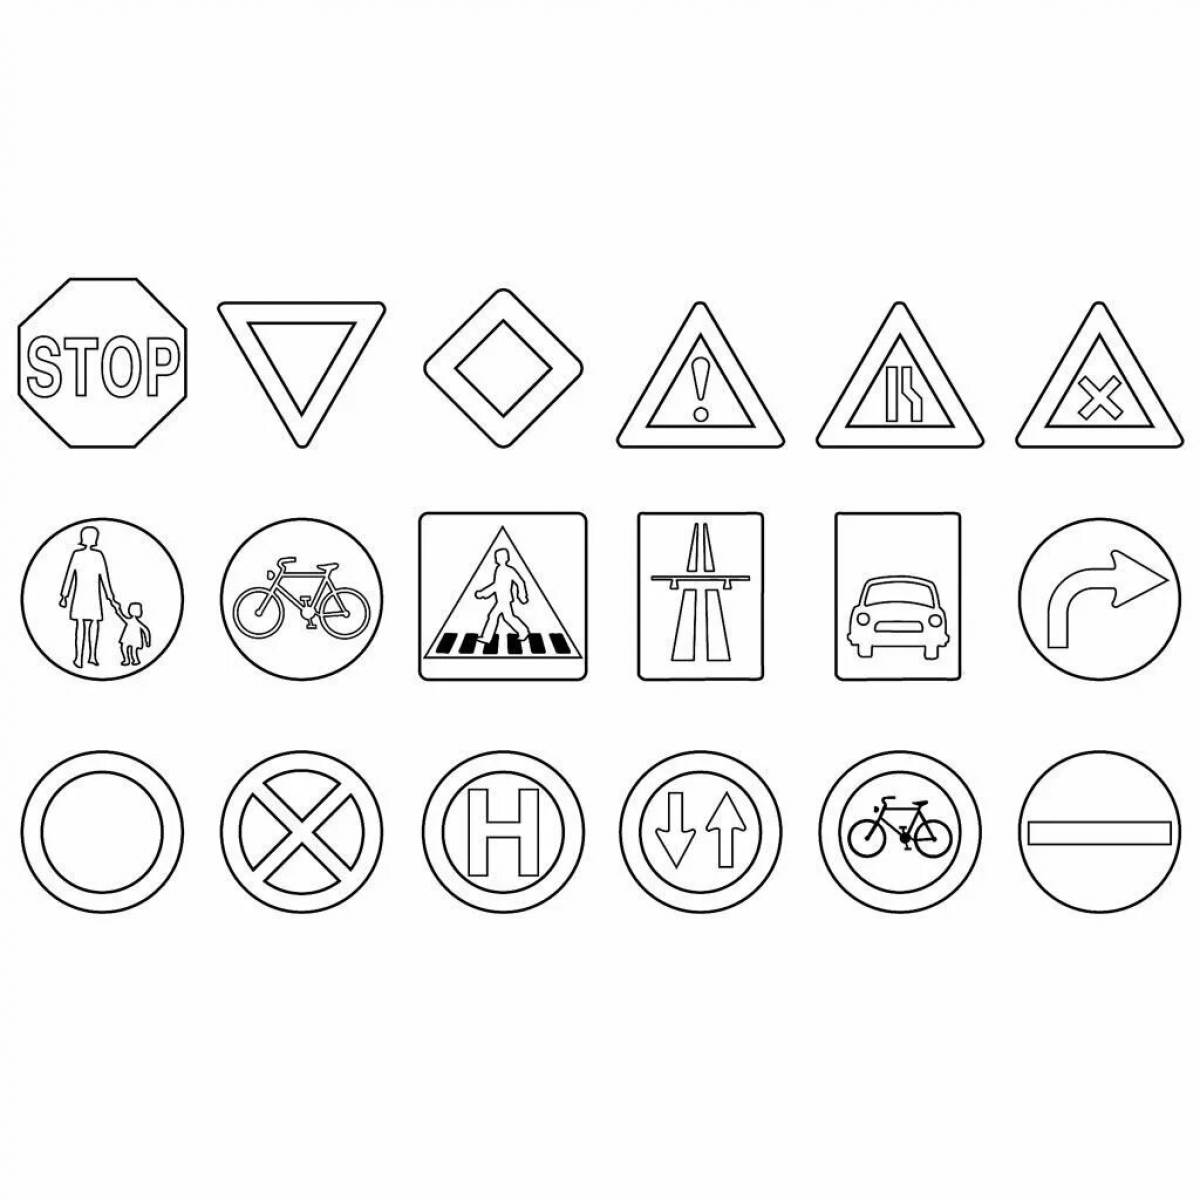 Intriguing traffic signs coloring page